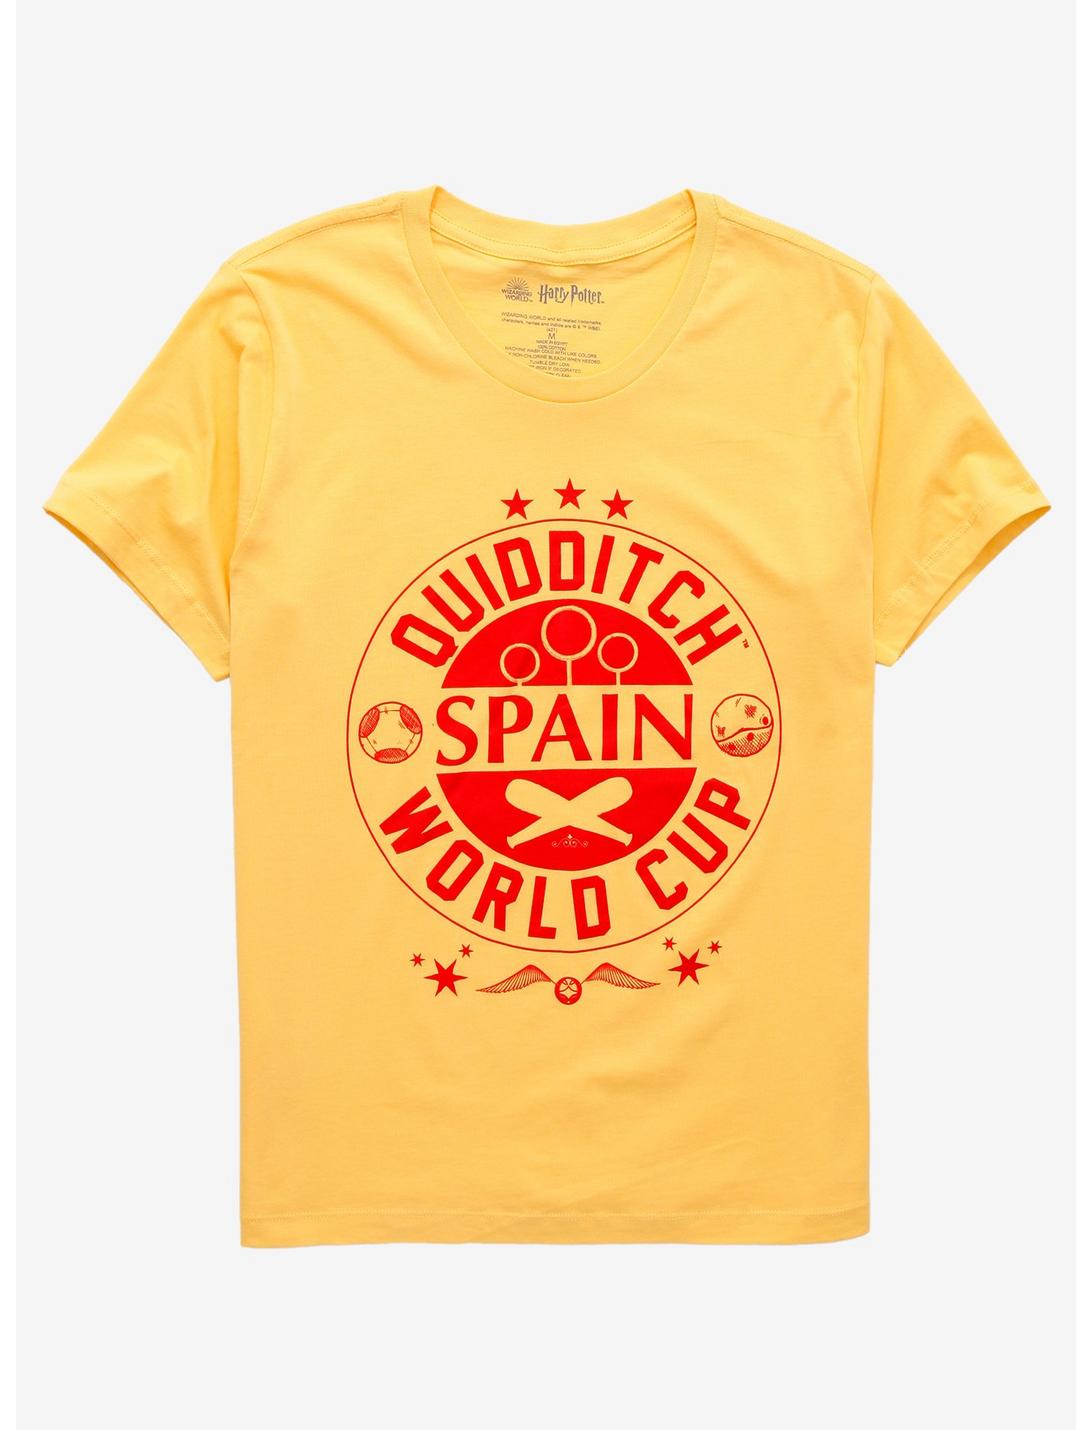 Harry Potter Quidditch World Cup Spain T-Shirt - BoxLunch Exclusive, BRIGHT YELLOW, hi-res